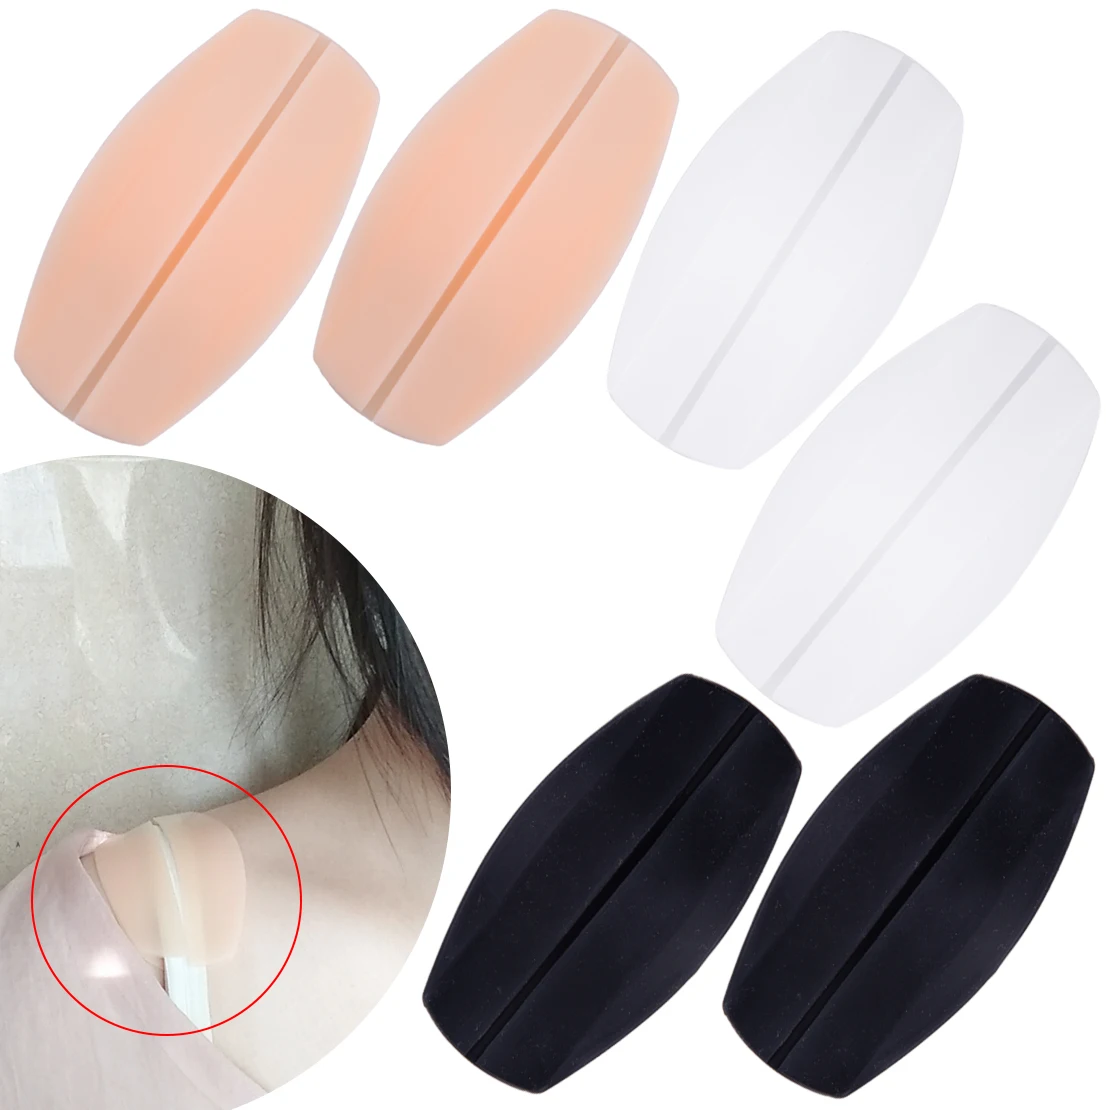 2 Pcs Non-slip Shoulder Pads Relief Pain Soft Silicone Bra Strap Cushions Holder 